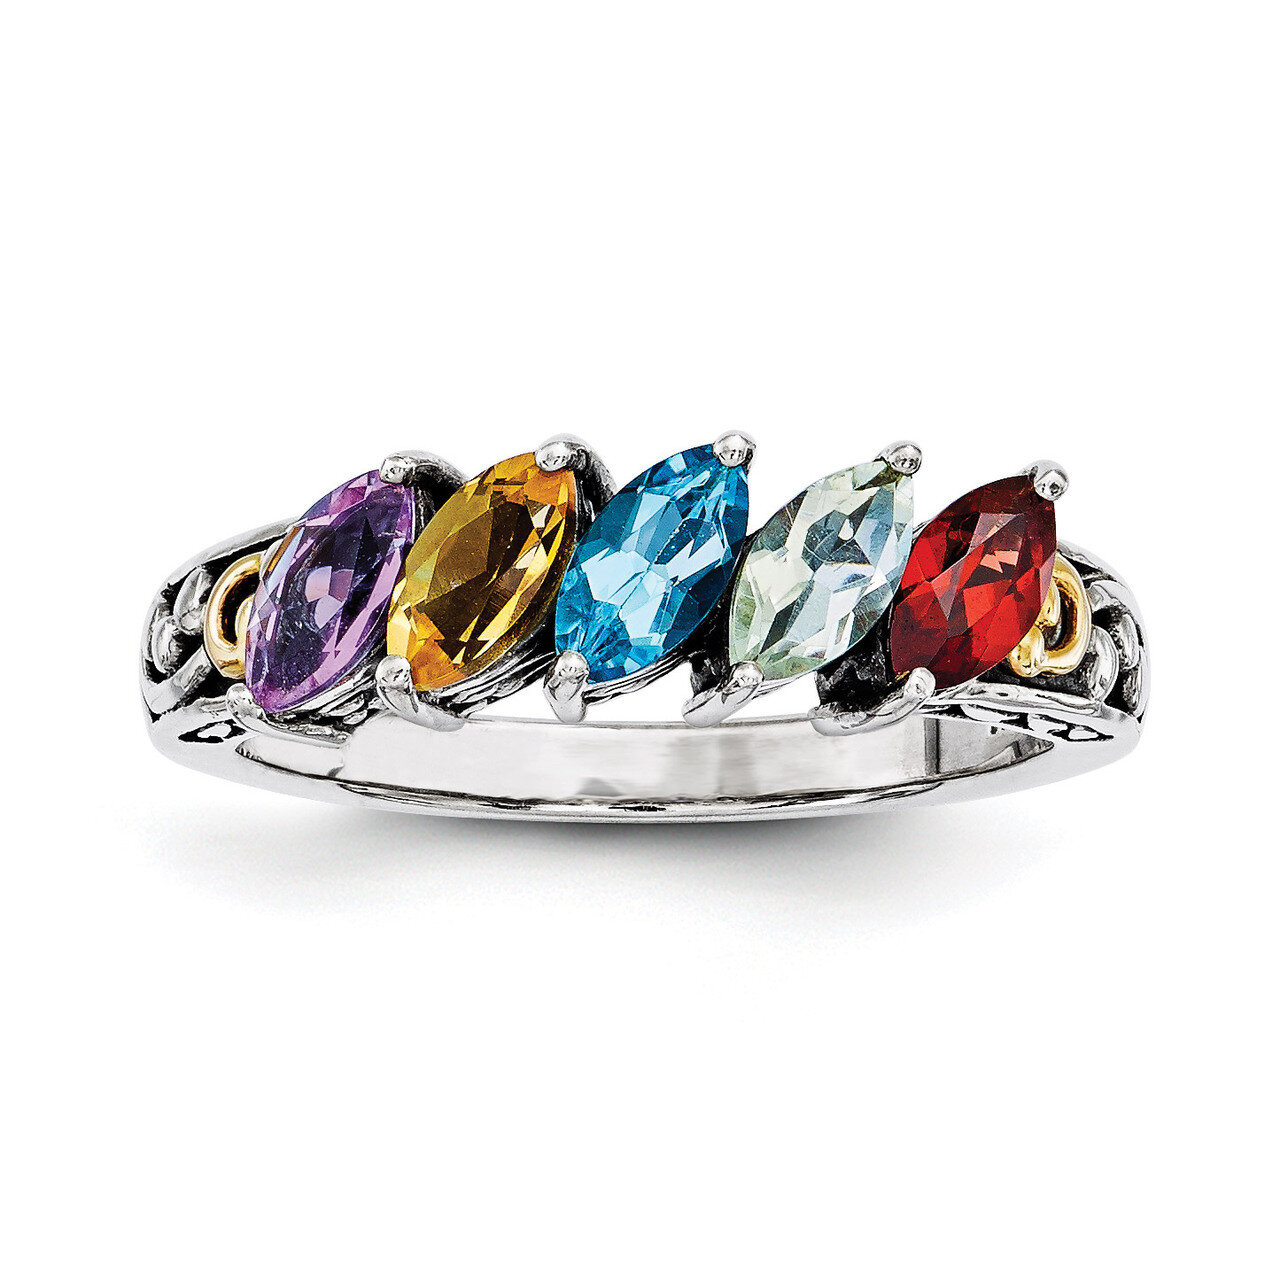 5 Birthstones & 14k Five-stone Mother's Ring Sterling Silver QMR17/5-10